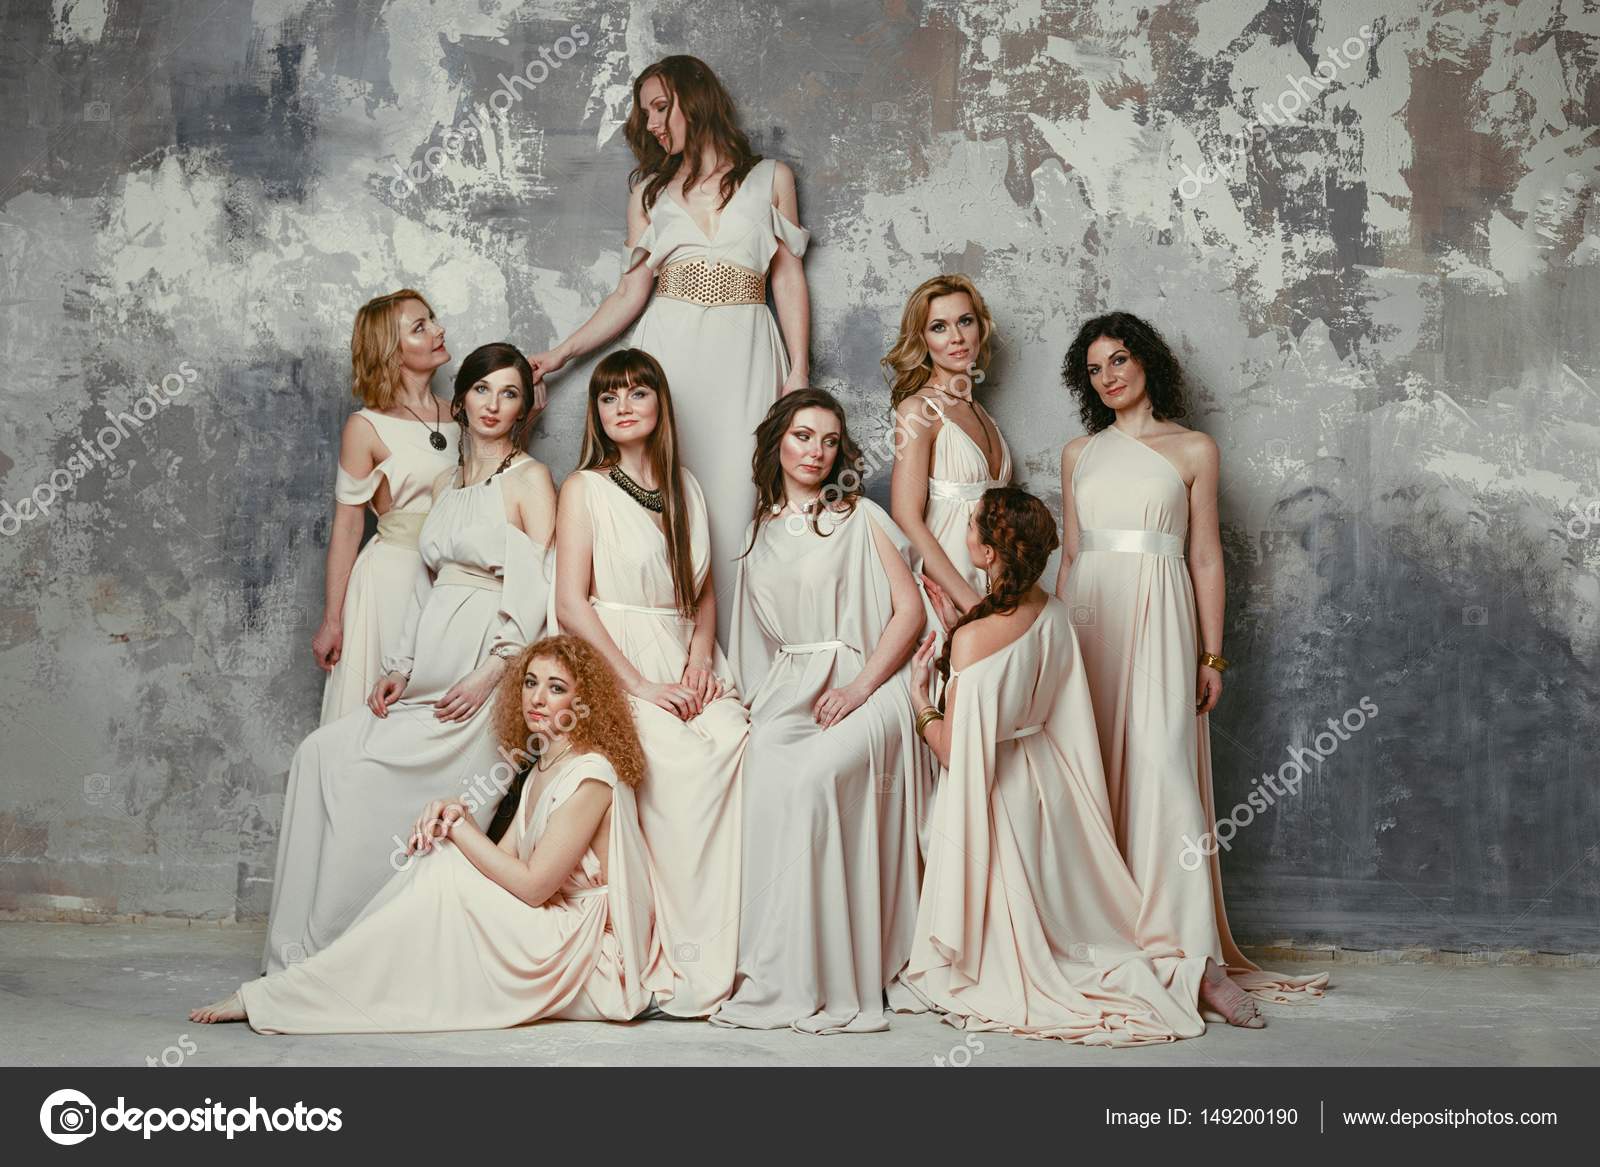 Pictures : ancient greek clothing | Women in ancient greek style ...